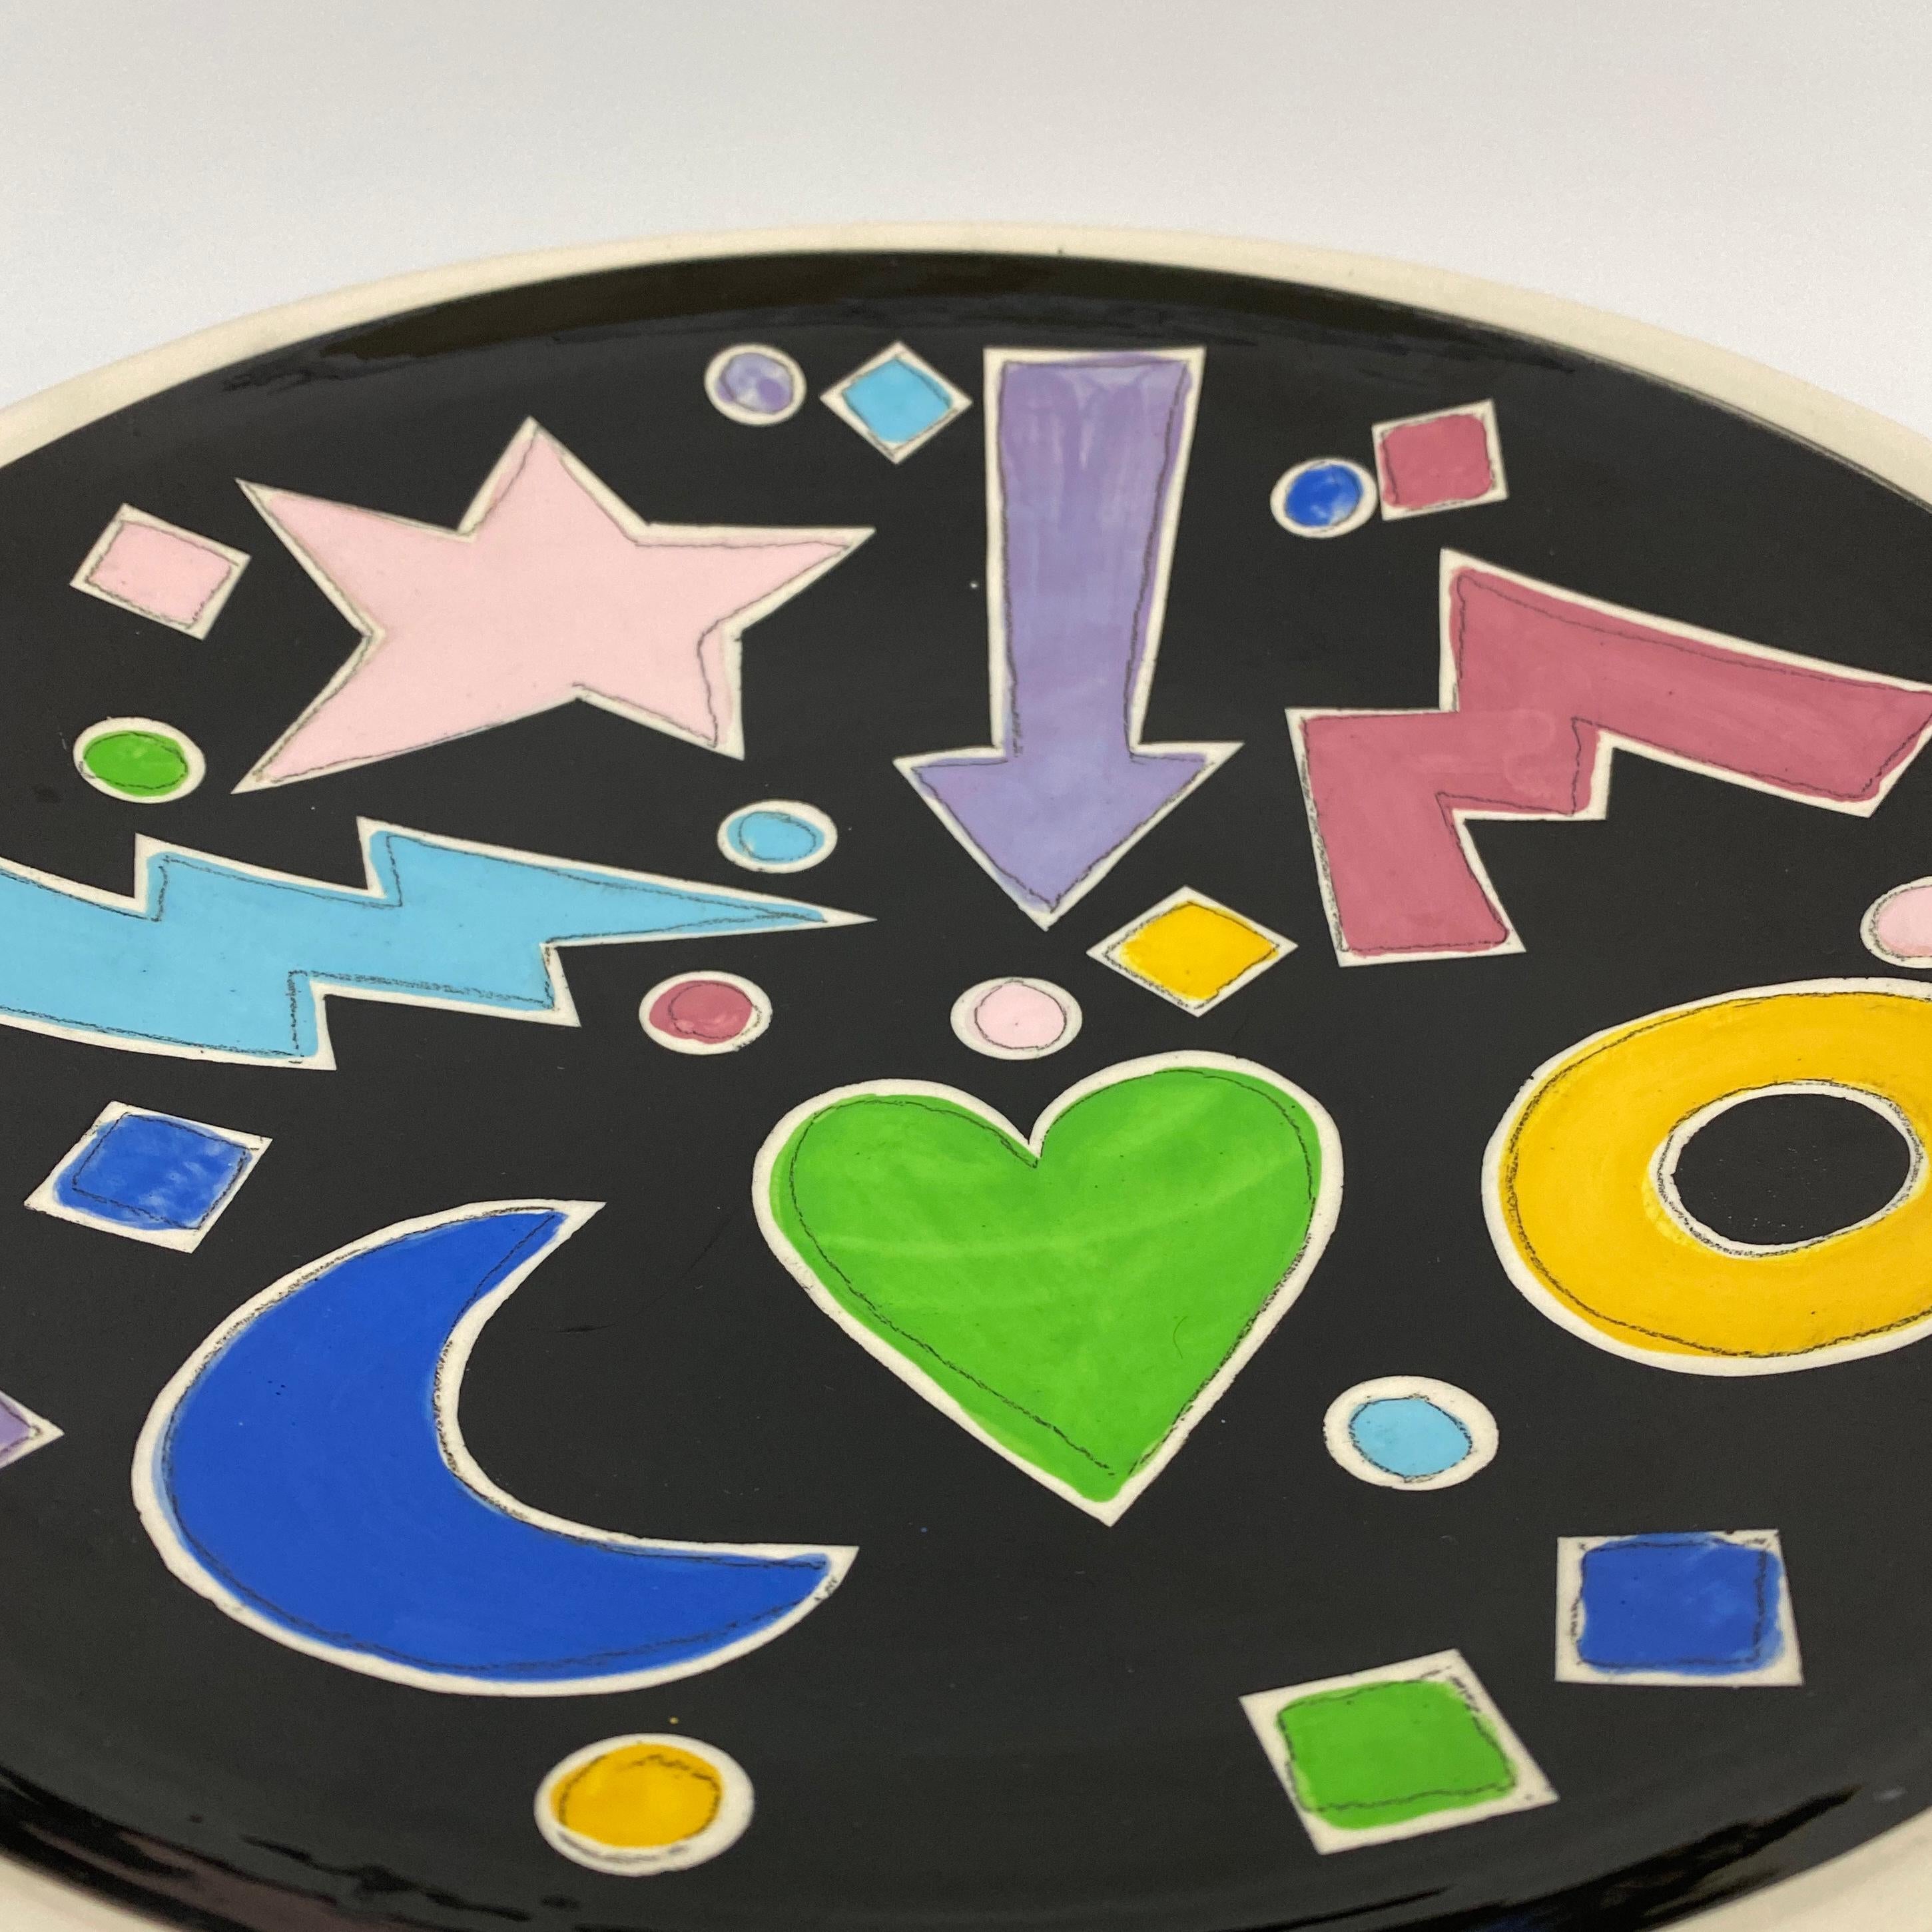 Vintage studio pottery dish with bold colors and shapes including a star, a heart, a lightening bolt and a moon. Postmodern/Pop Art design with multiple colors. Nice large scale for a statement piece of decor. Signed “T Saito 1988”.